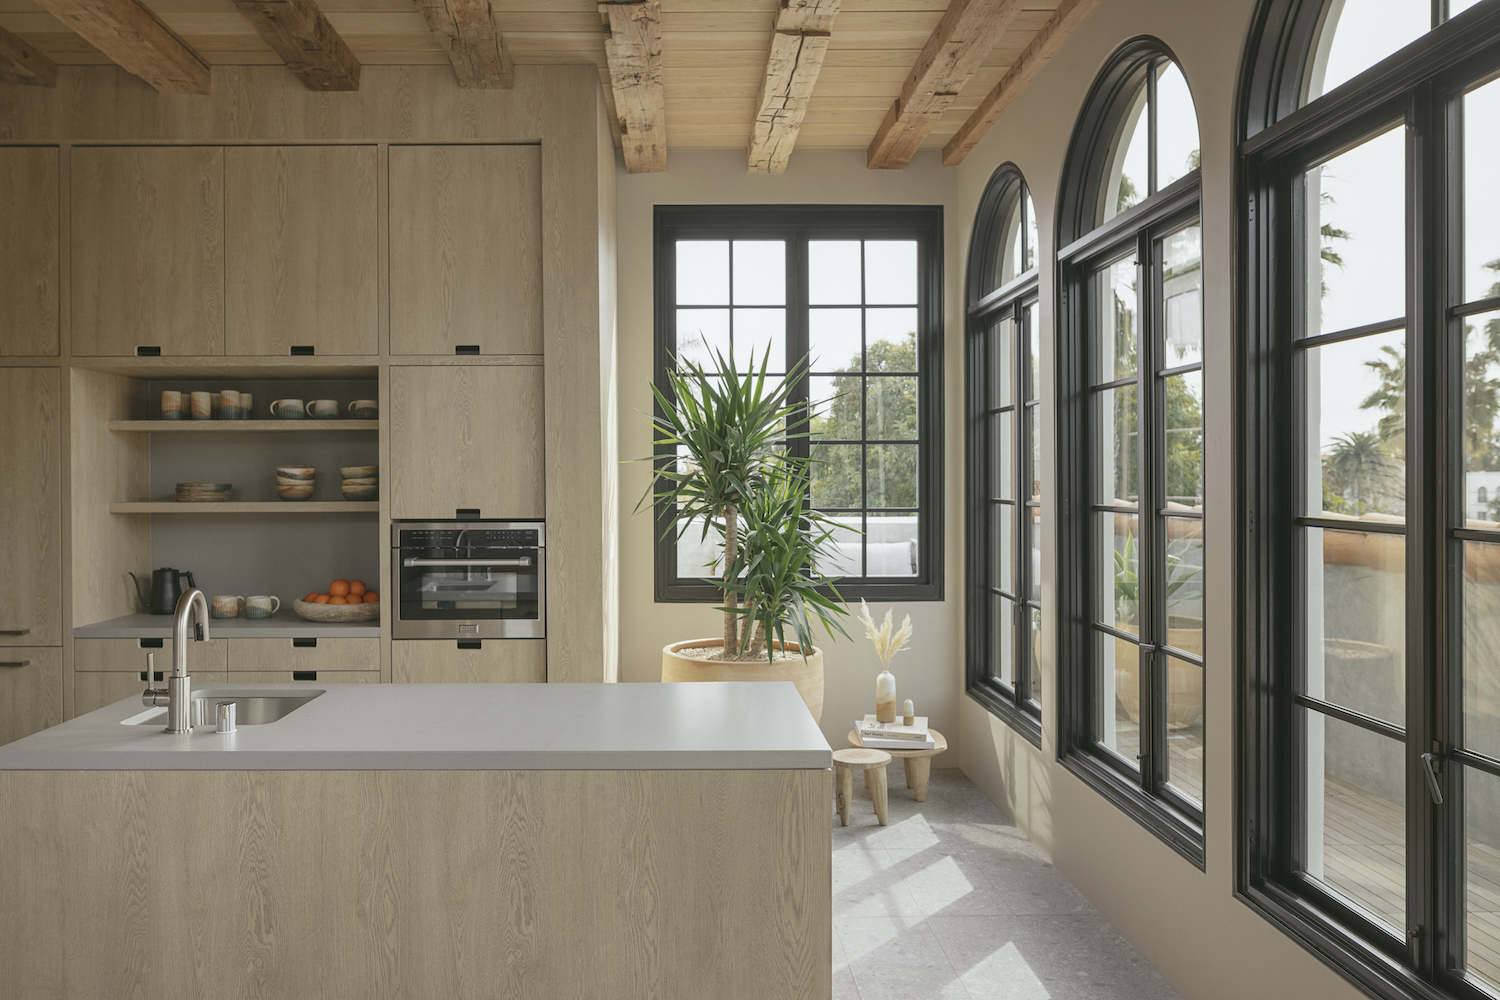 Kitchen area with tall windows and brown aesthetic 